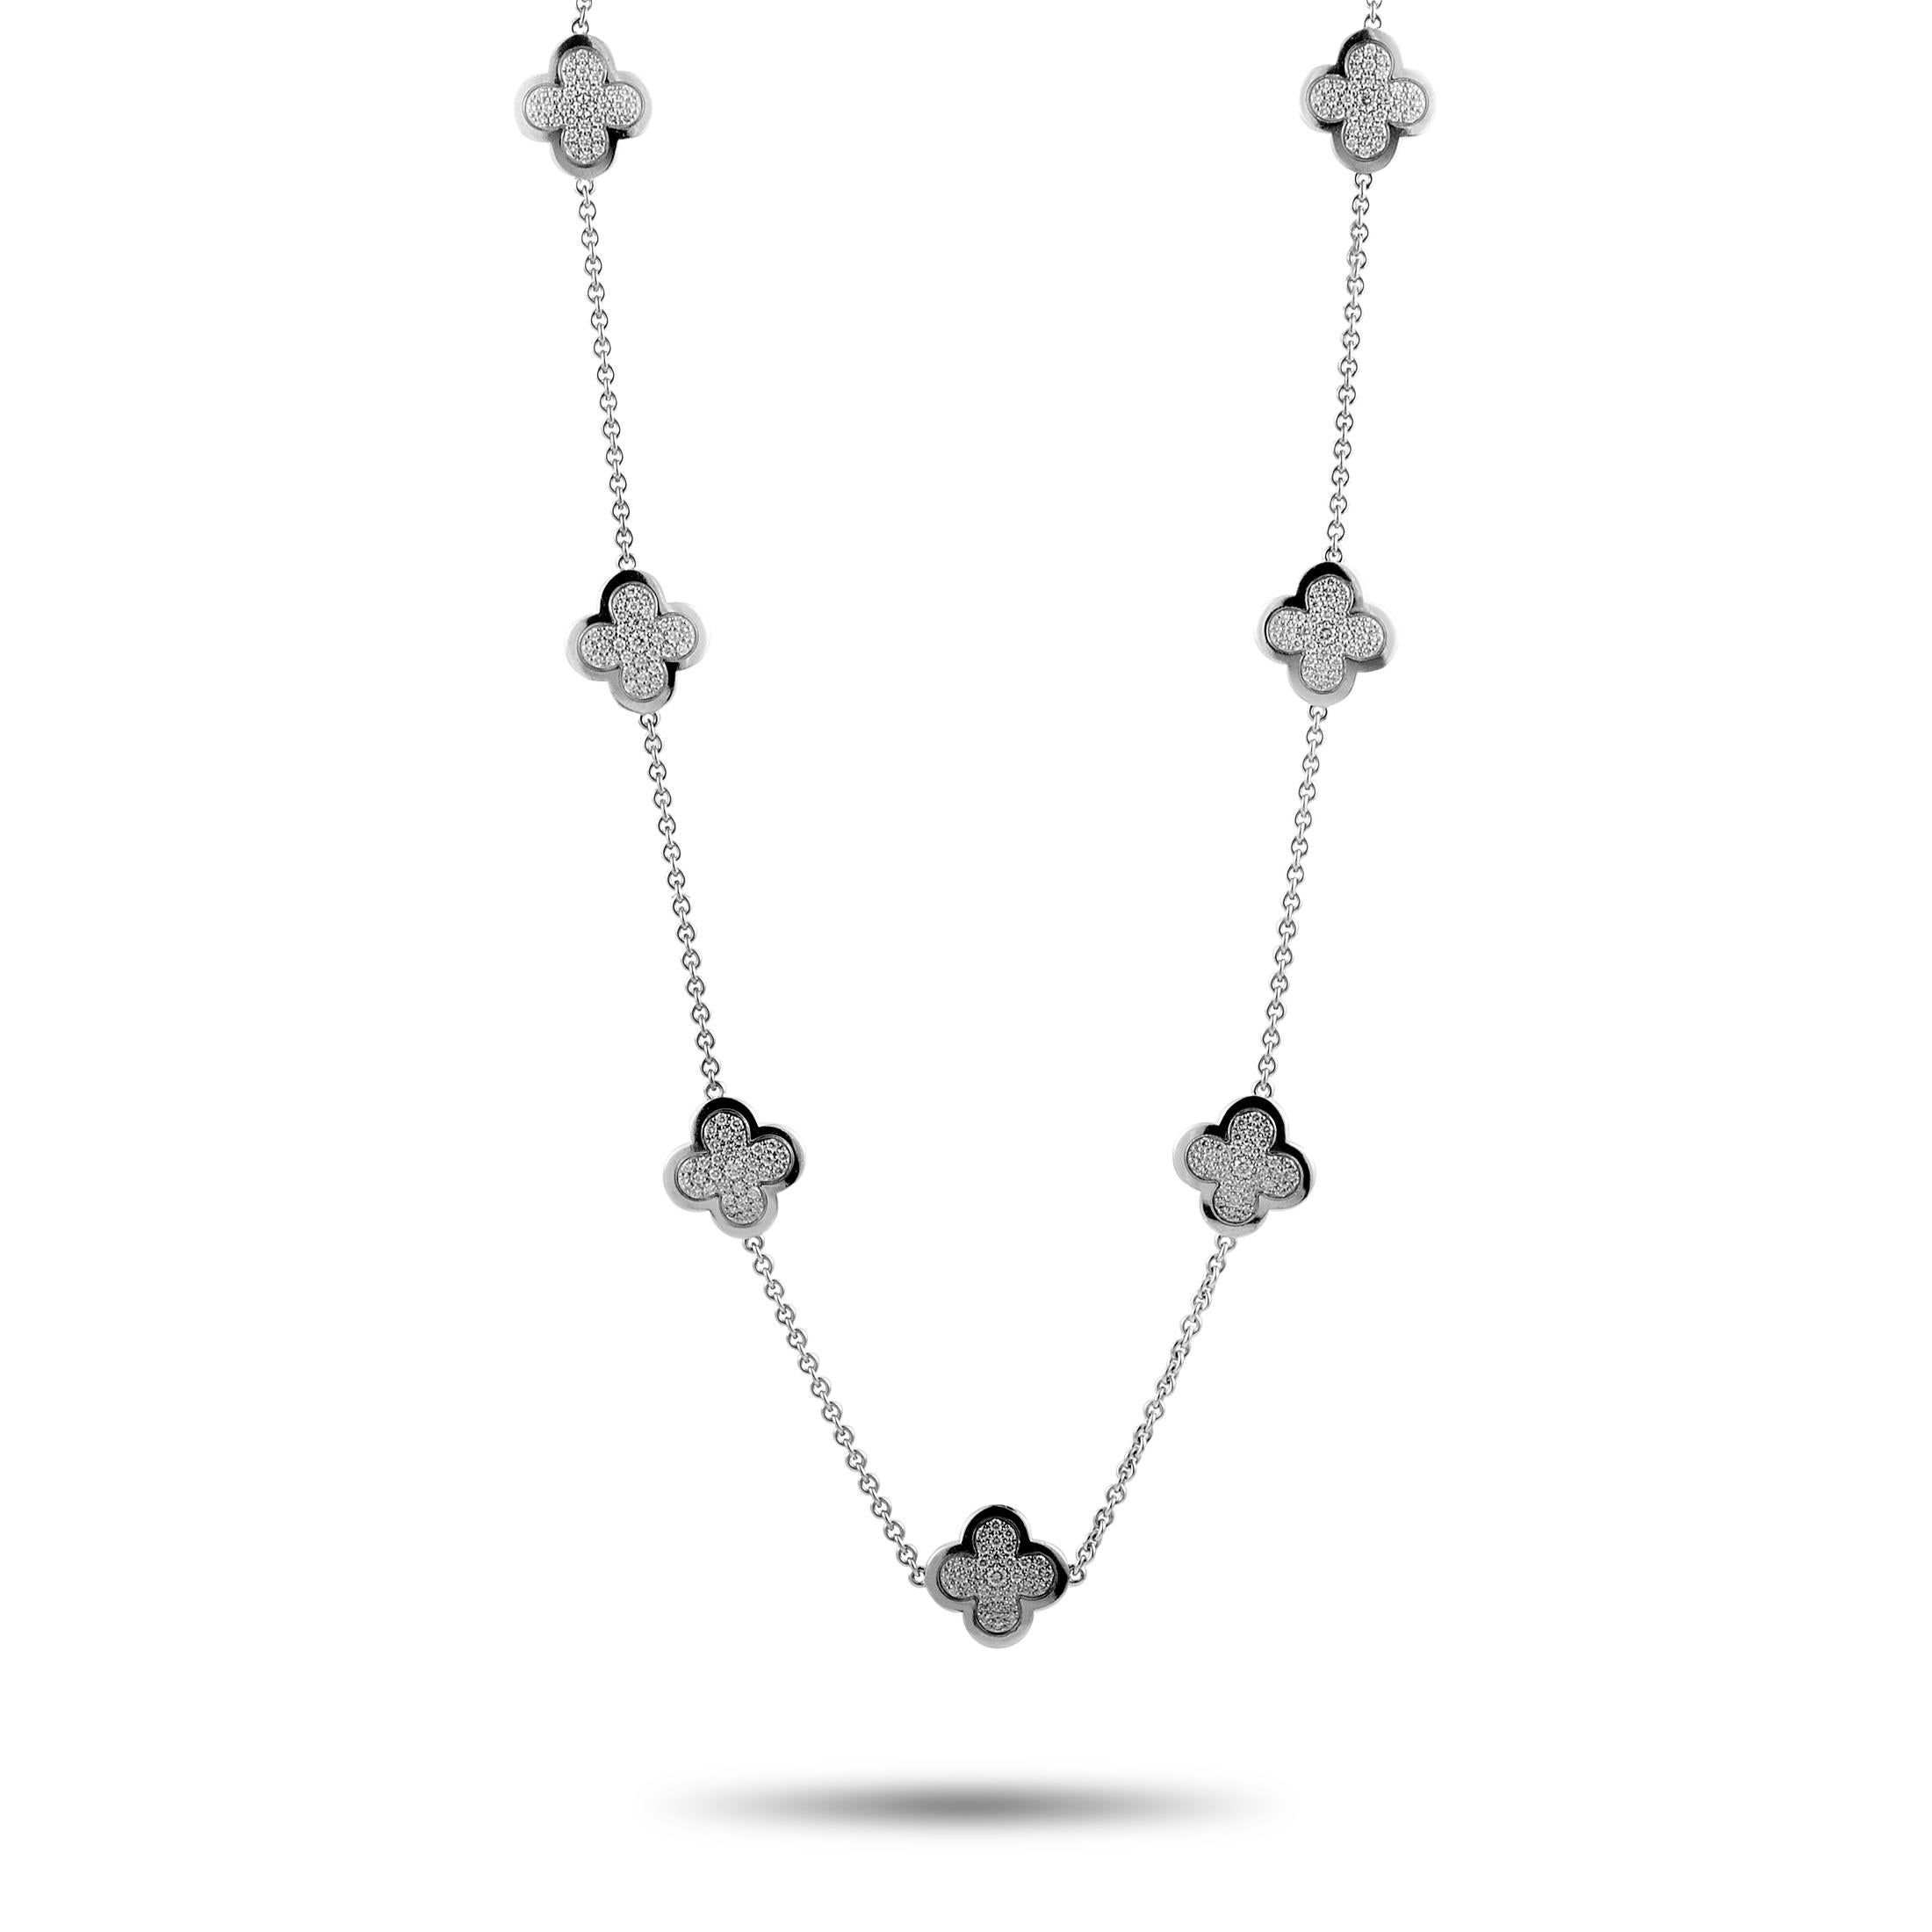 Add a sublime dash of lustrous elegance to your ensembles with this refined Van Cleef & Arpels piece that is designed in a splendidly classy fashion. The necklace is beautifully made of 18K white gold and it is lavishly embellished with a plethora